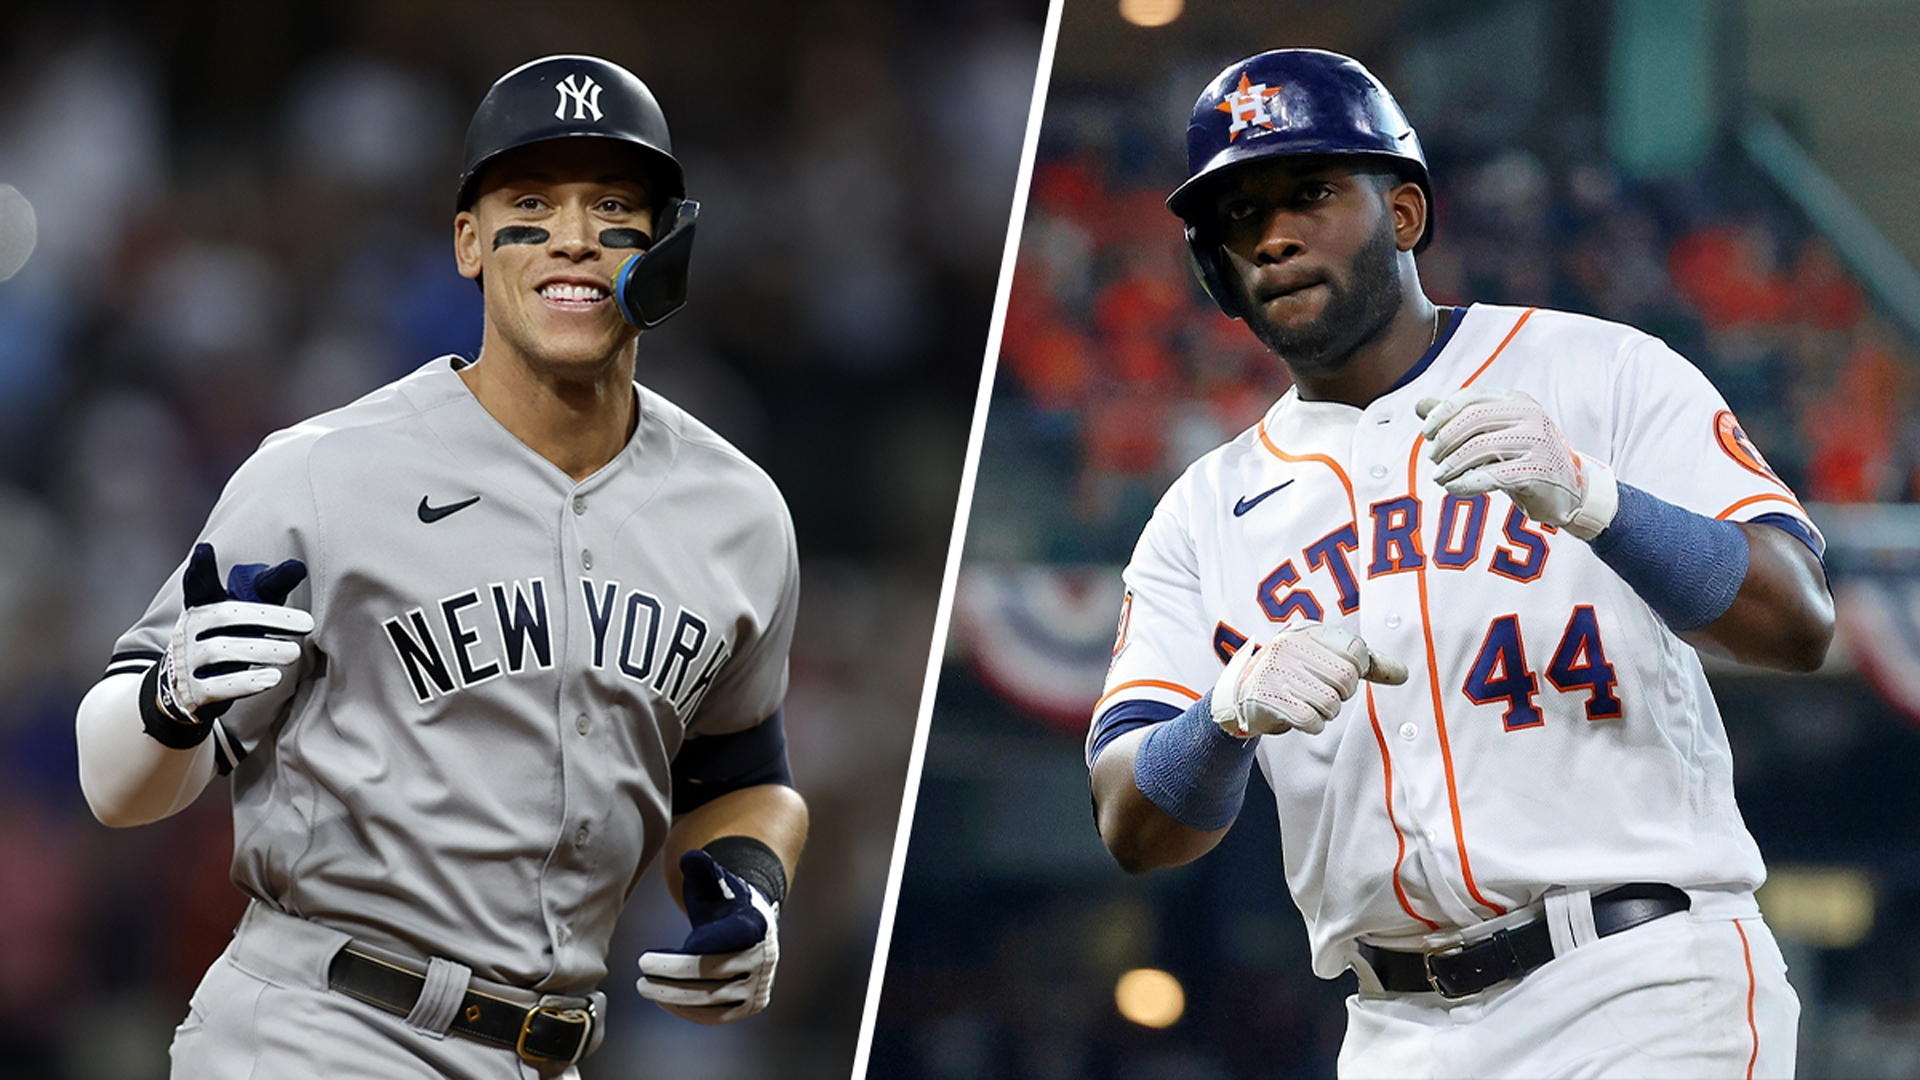 Yankees-Astros American League Championship Series Game 2 odds